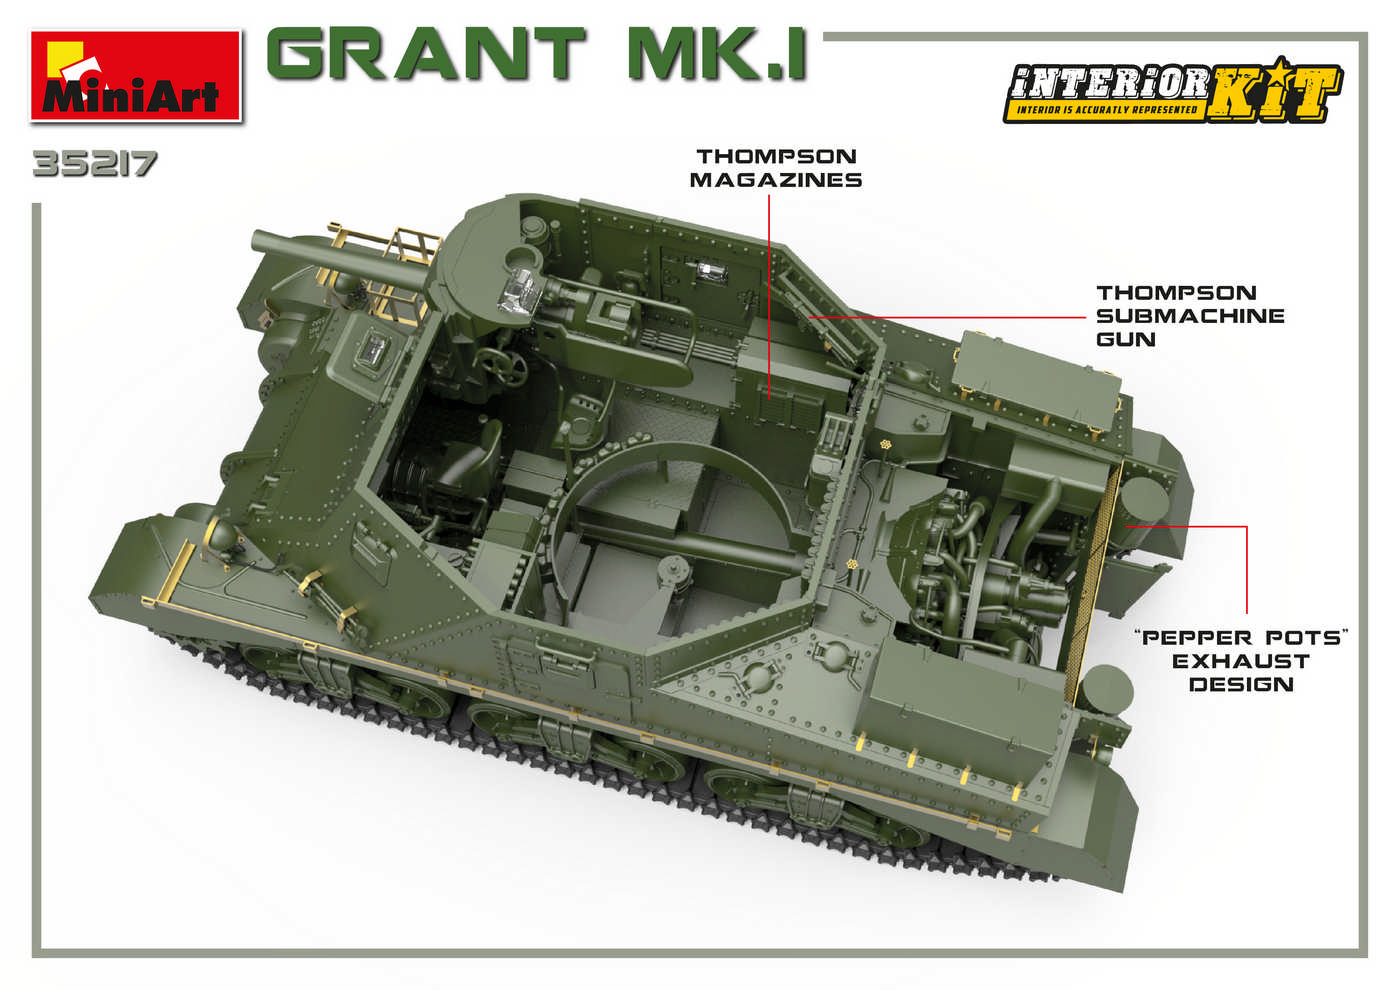 The Modelling News Preview The New 35th Scale Grant Mk I